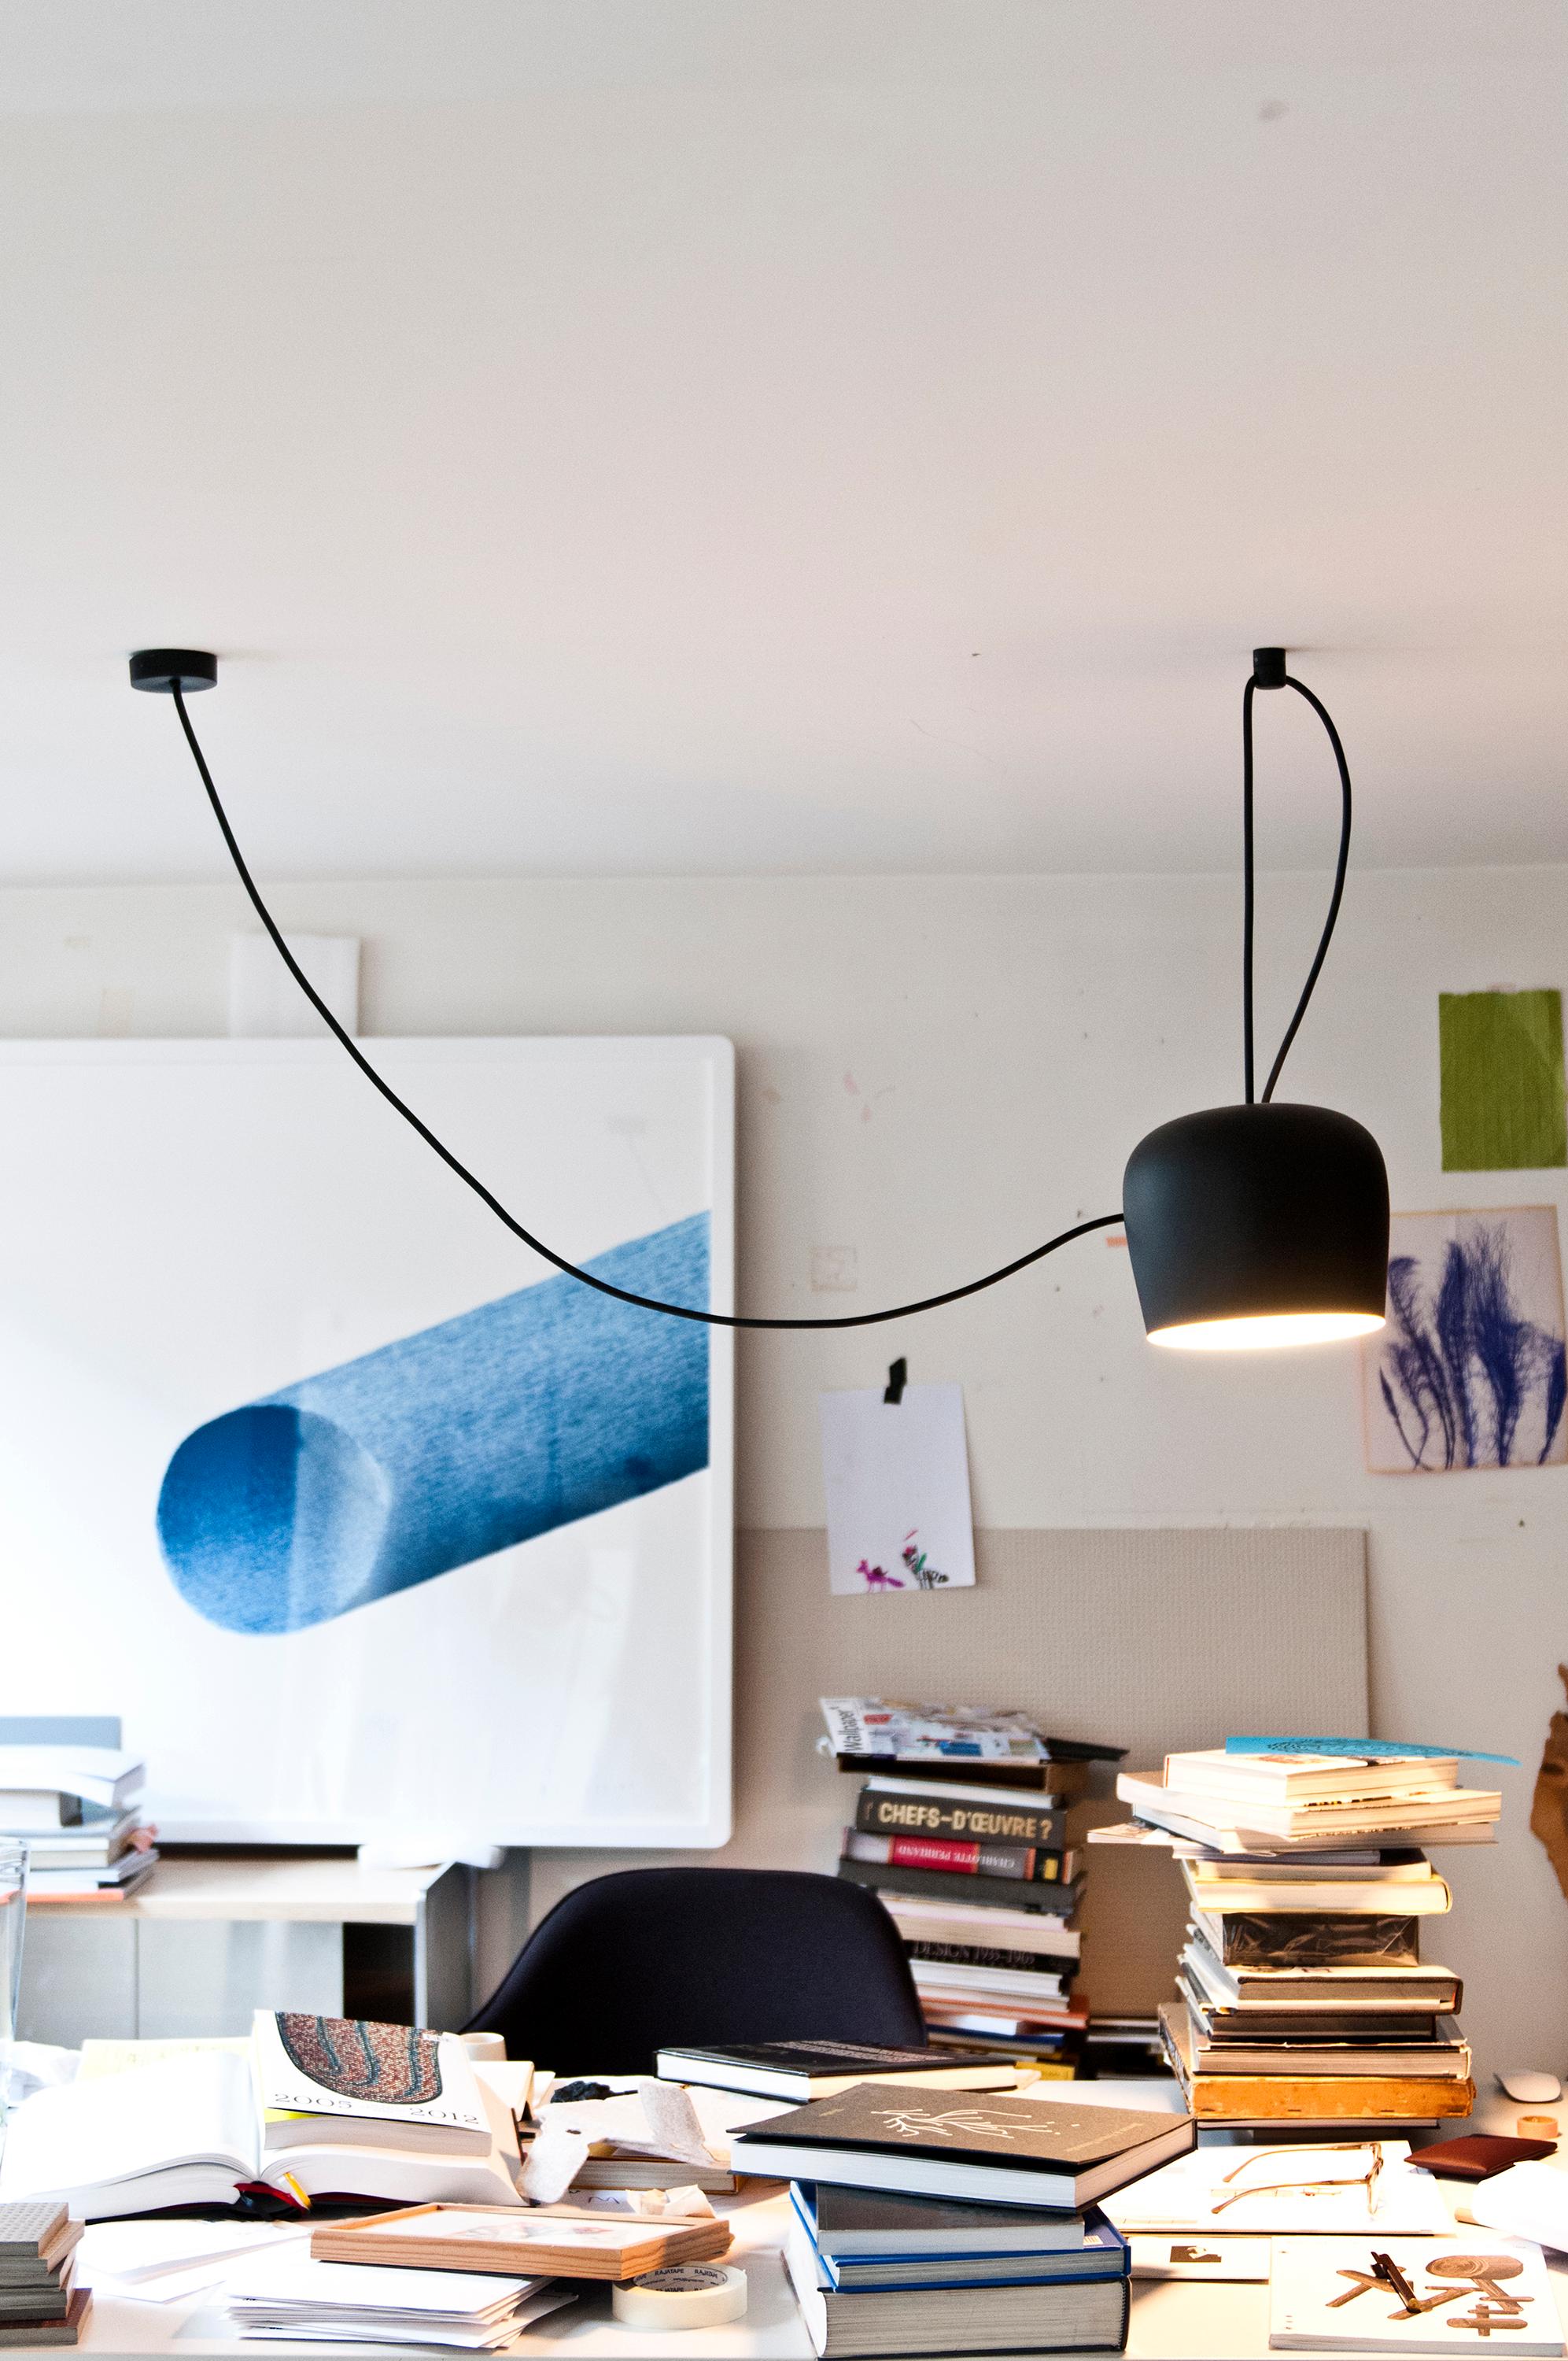 FLOS AIM Small Pendant Light in Black by Ronan & Erwan Bouroullec

Like the others in the AIM family created by the Bouroullec brothers in 2010, the AIM-Small ceiling light is a design stripped to its most basic—and beautiful—essence. This